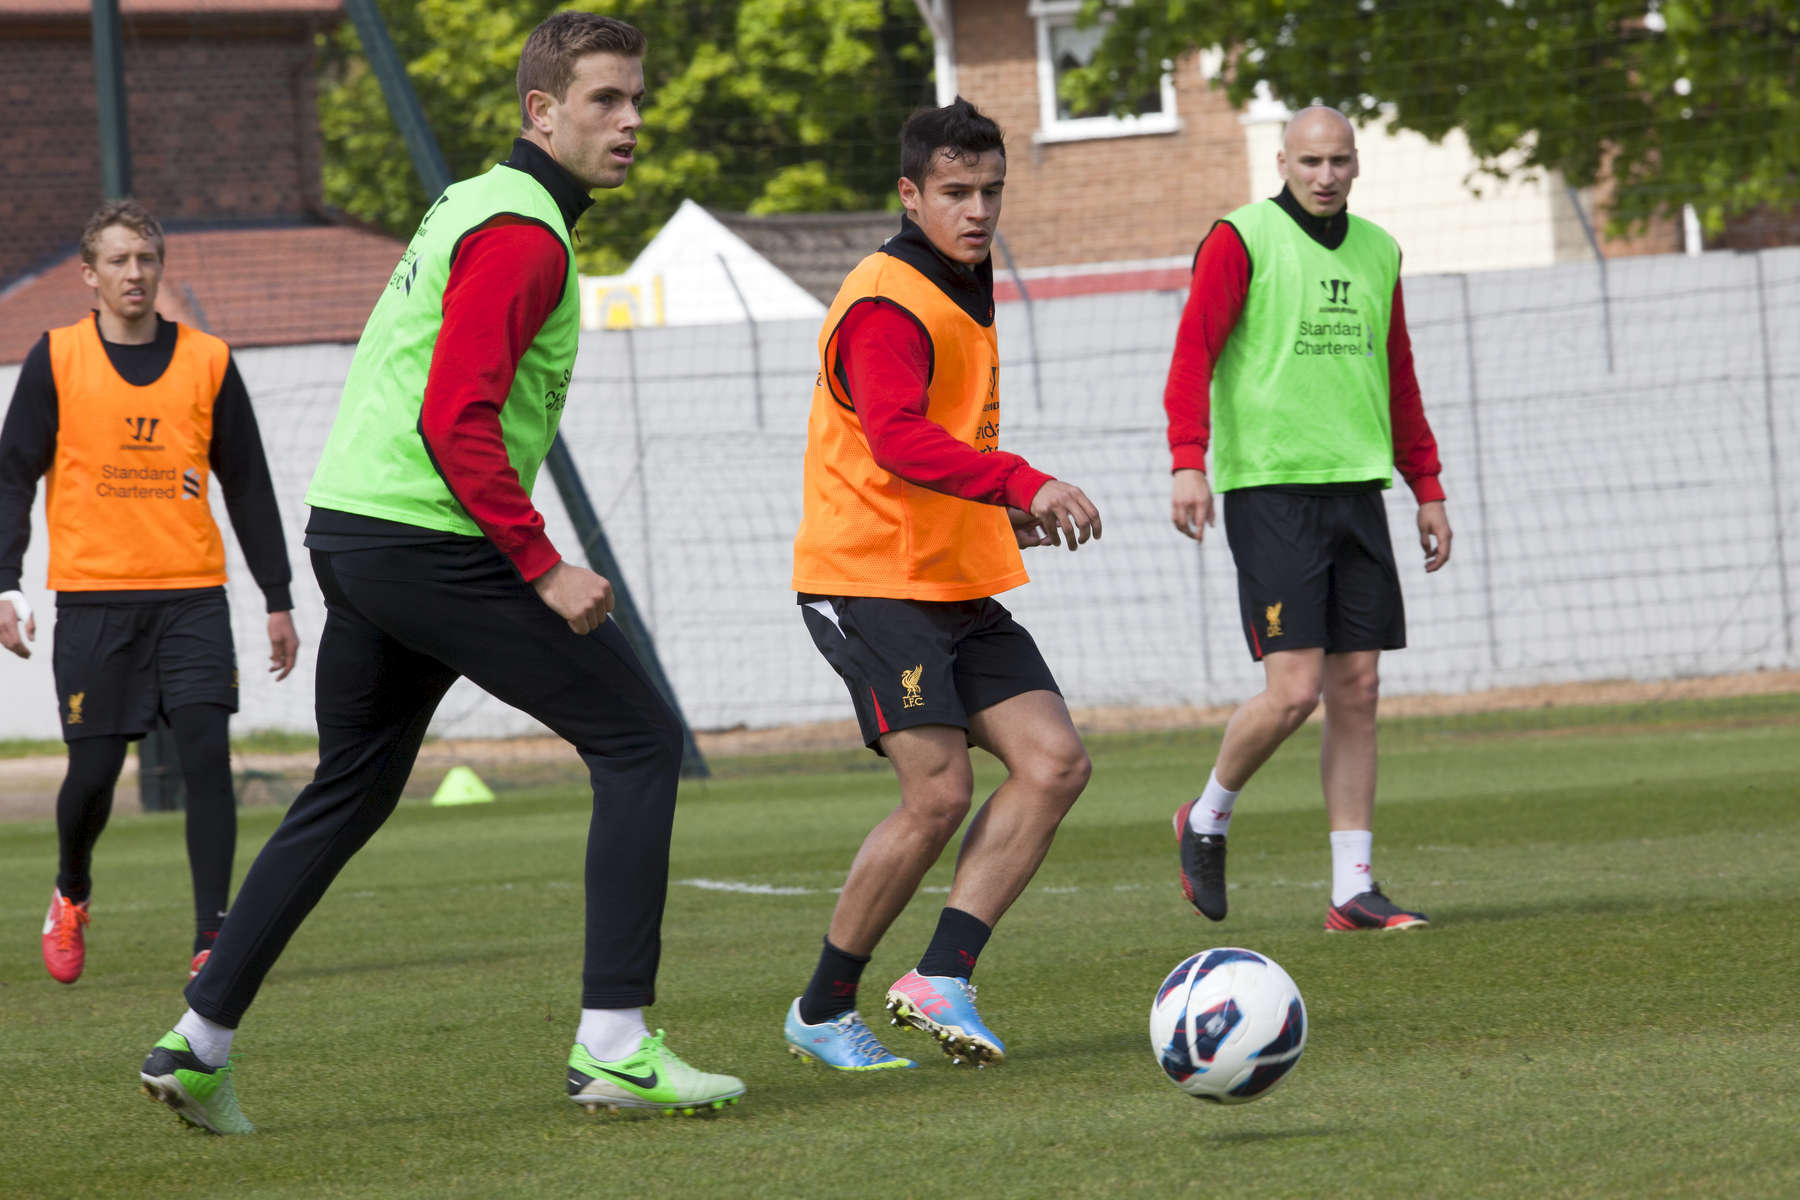 Lucas (far left) Jordan Henderson (second from left) and Jonjo Shelvey (far right) during training at Melwood.Melwood is the Liverpool FC training ground, located in the West Derby area of Liverpool. It is seperate from the Liverpool Academy, which is based in Kirkby.Melwood was redeveloped in the early 2000′s with large input from then-manager Gerard Houllier and now features some of the best facilities in Europe. It has been the club’s training ground since the fifties and was previously transformed into a top class facility by Bill Shankly.Facilities include sythetic pitches, rehabilitation rooms, press and meeting rooms, gymnasium, swimming pool, restaurant and recreational facilities.